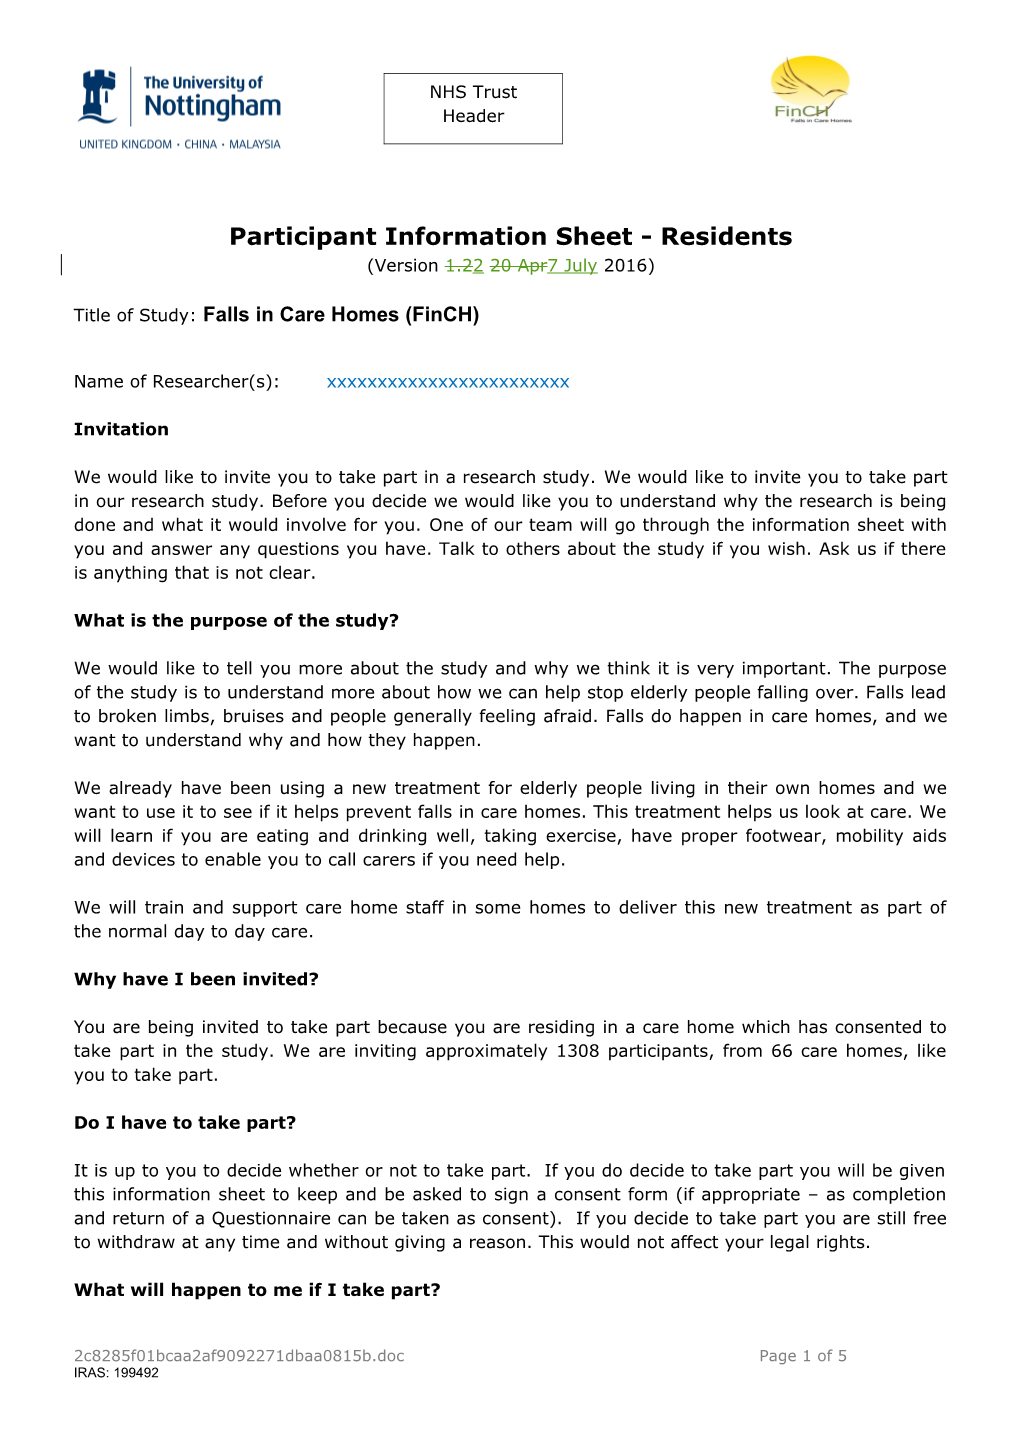 Participant Information Sheet - Residents